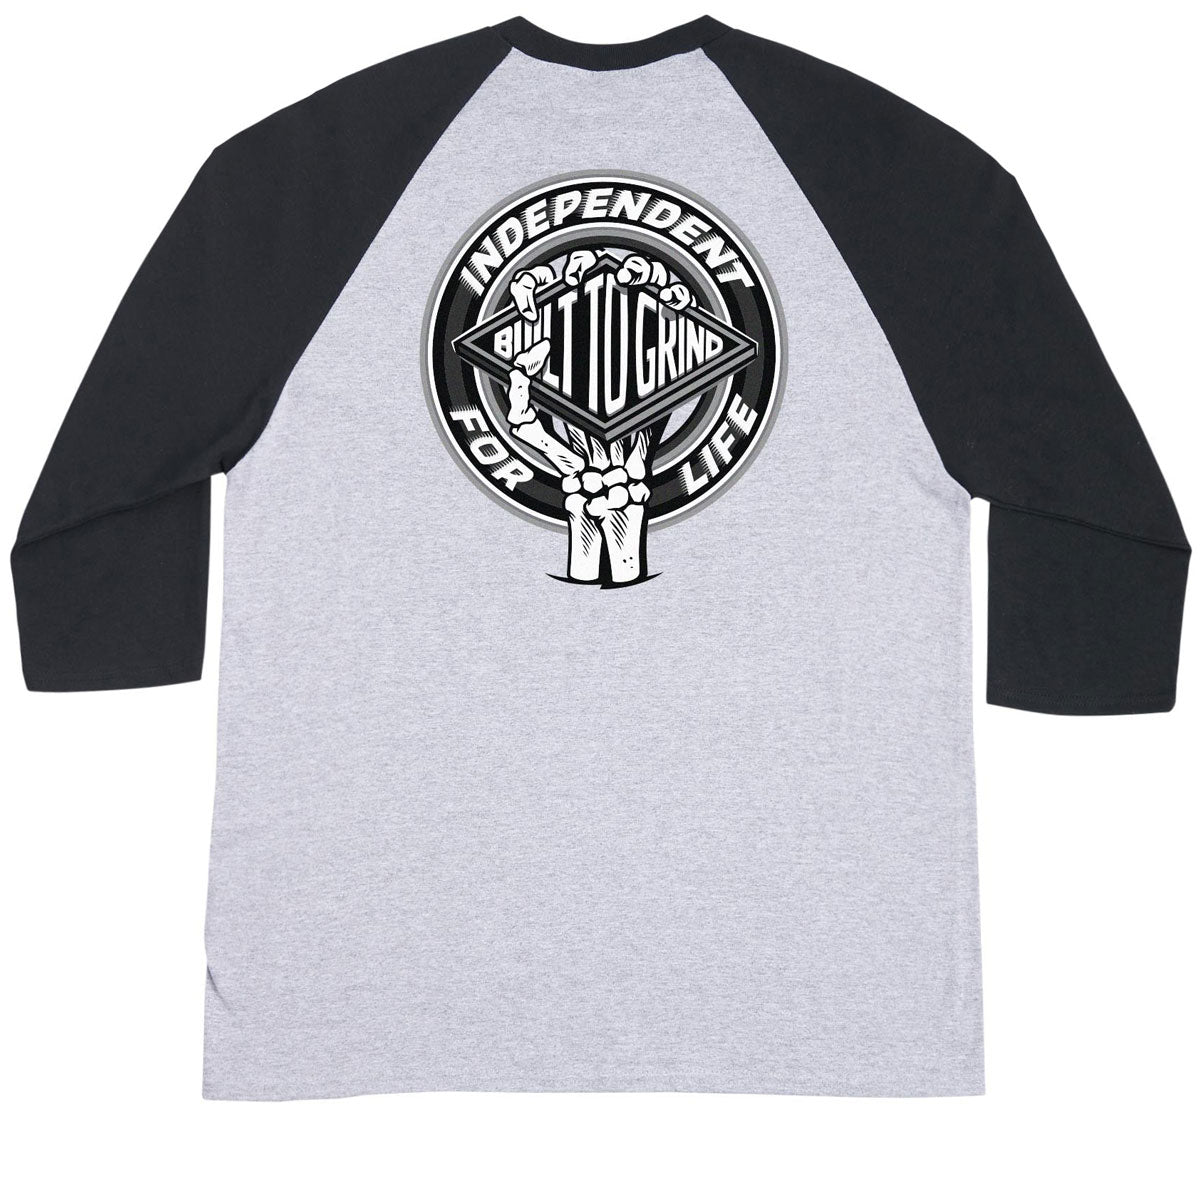 Independent For Life Clutch 3/4 Sleeve T-Shirt - Sport Grey/Black image 1